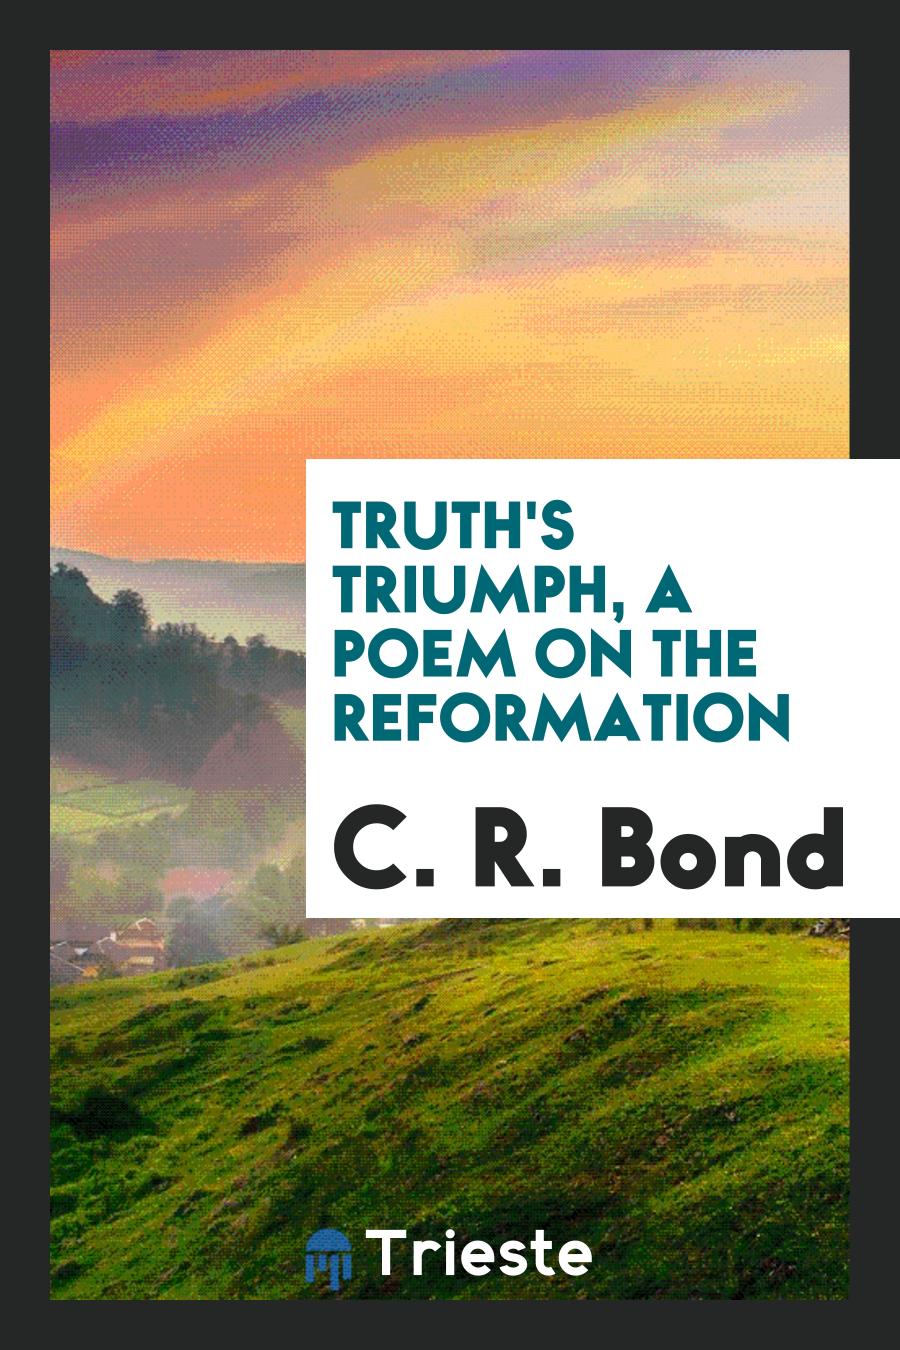 Truth's triumph, a poem on the reformation